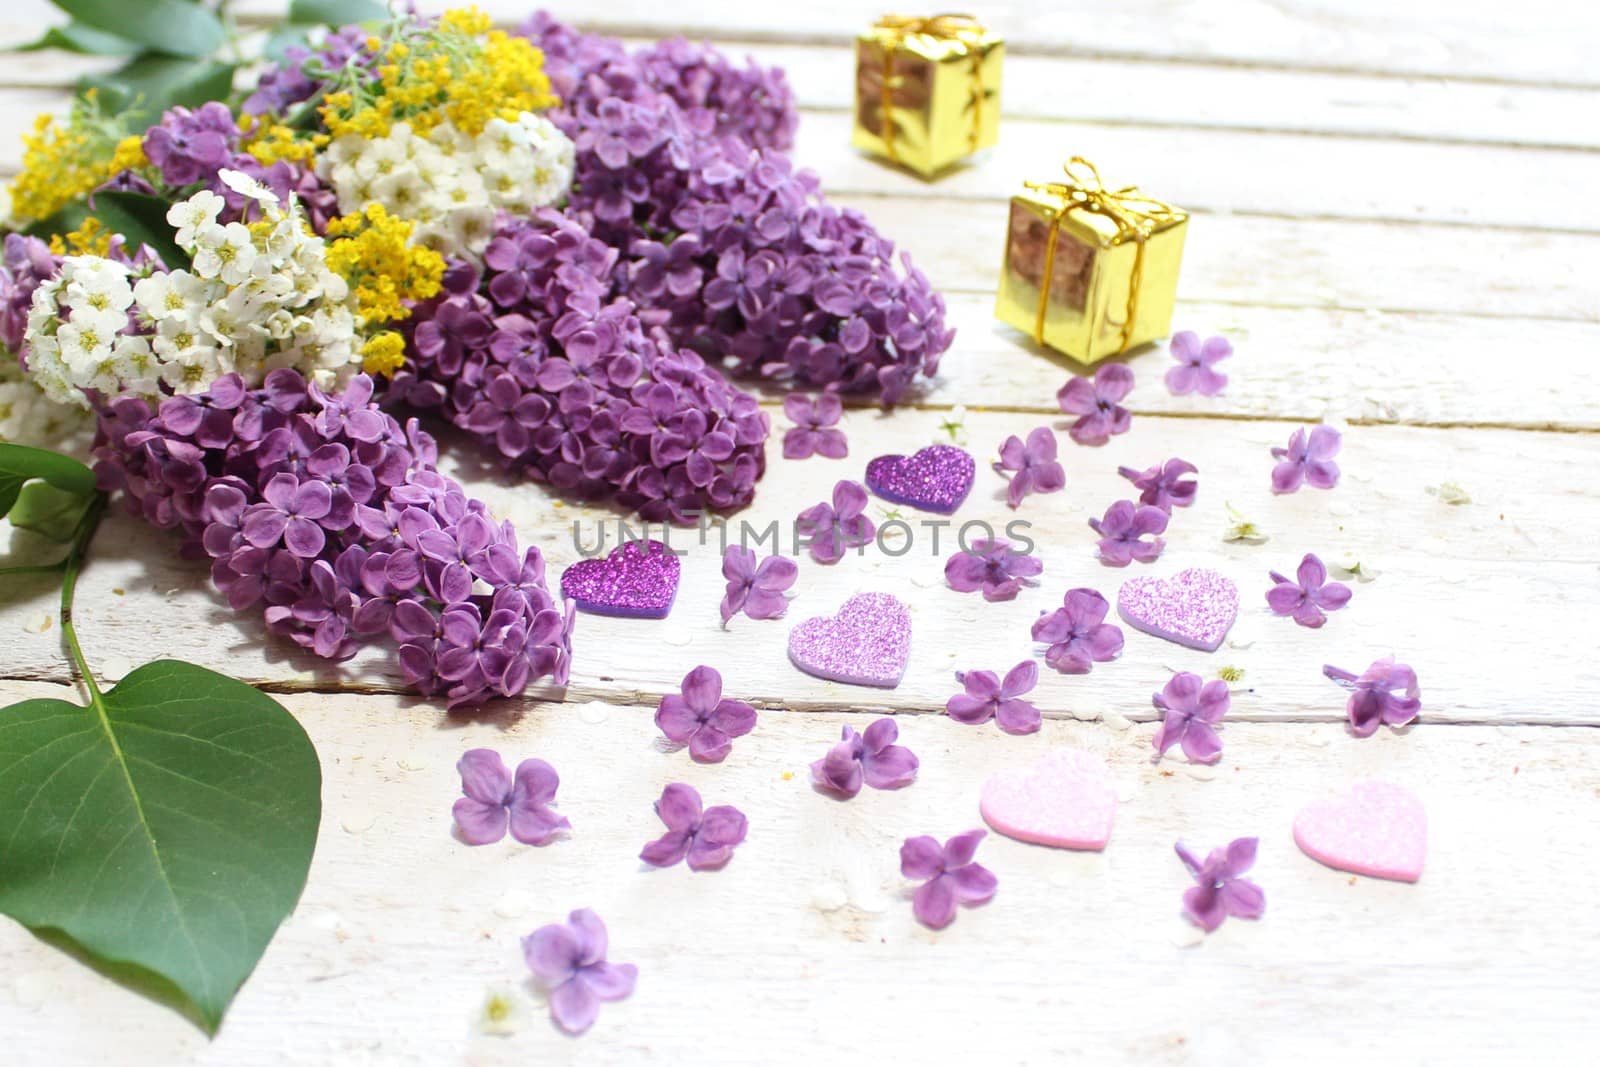 lilac, sweet alison, snowberry, hearts and gifts by martina_unbehauen